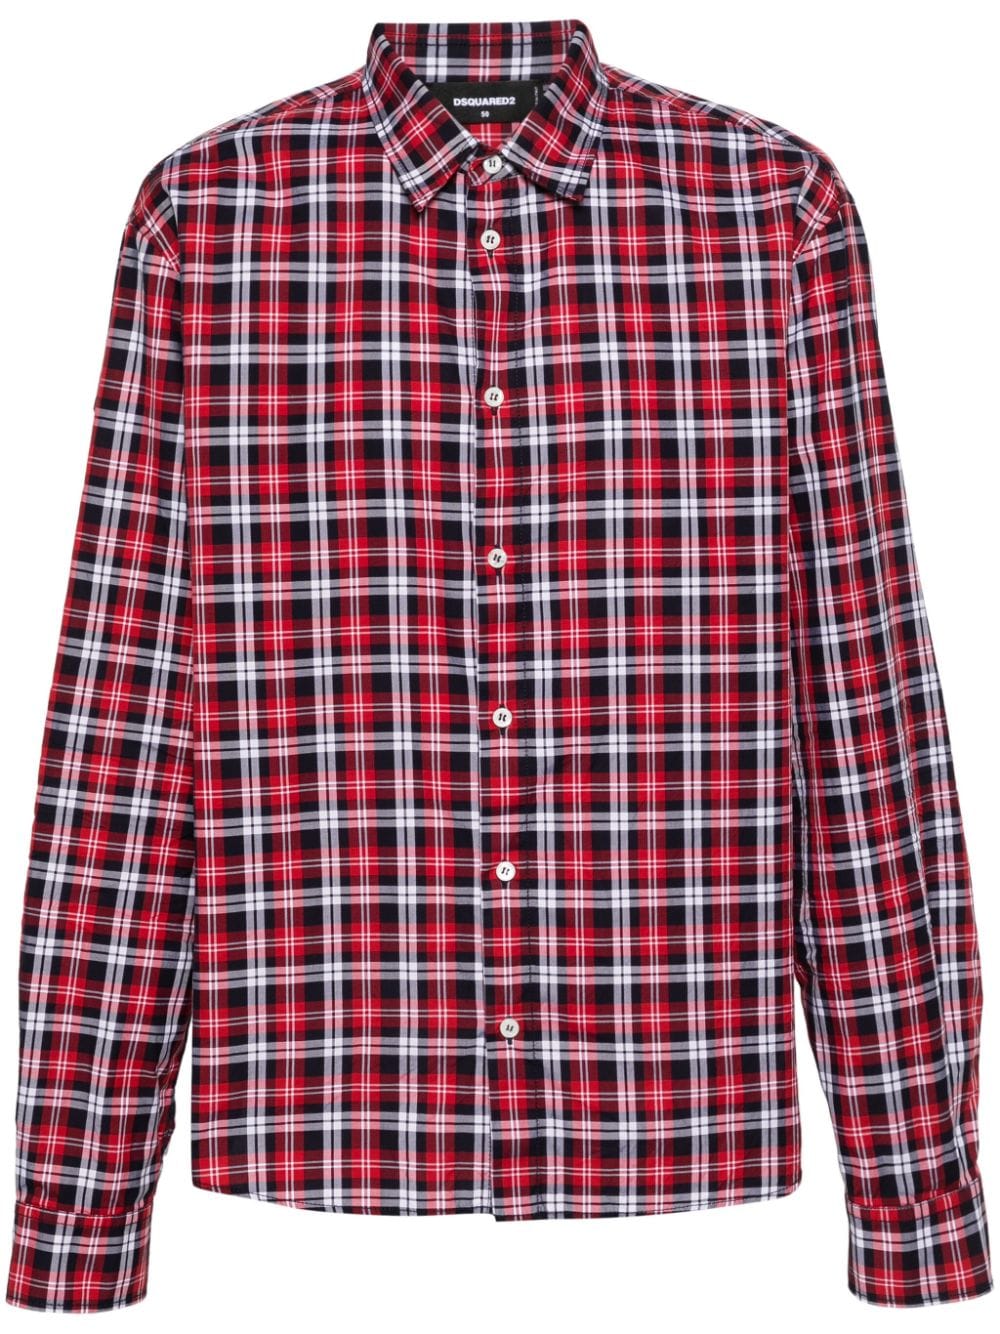 Dsquared2 Canadian Burbs checked shirt von Dsquared2